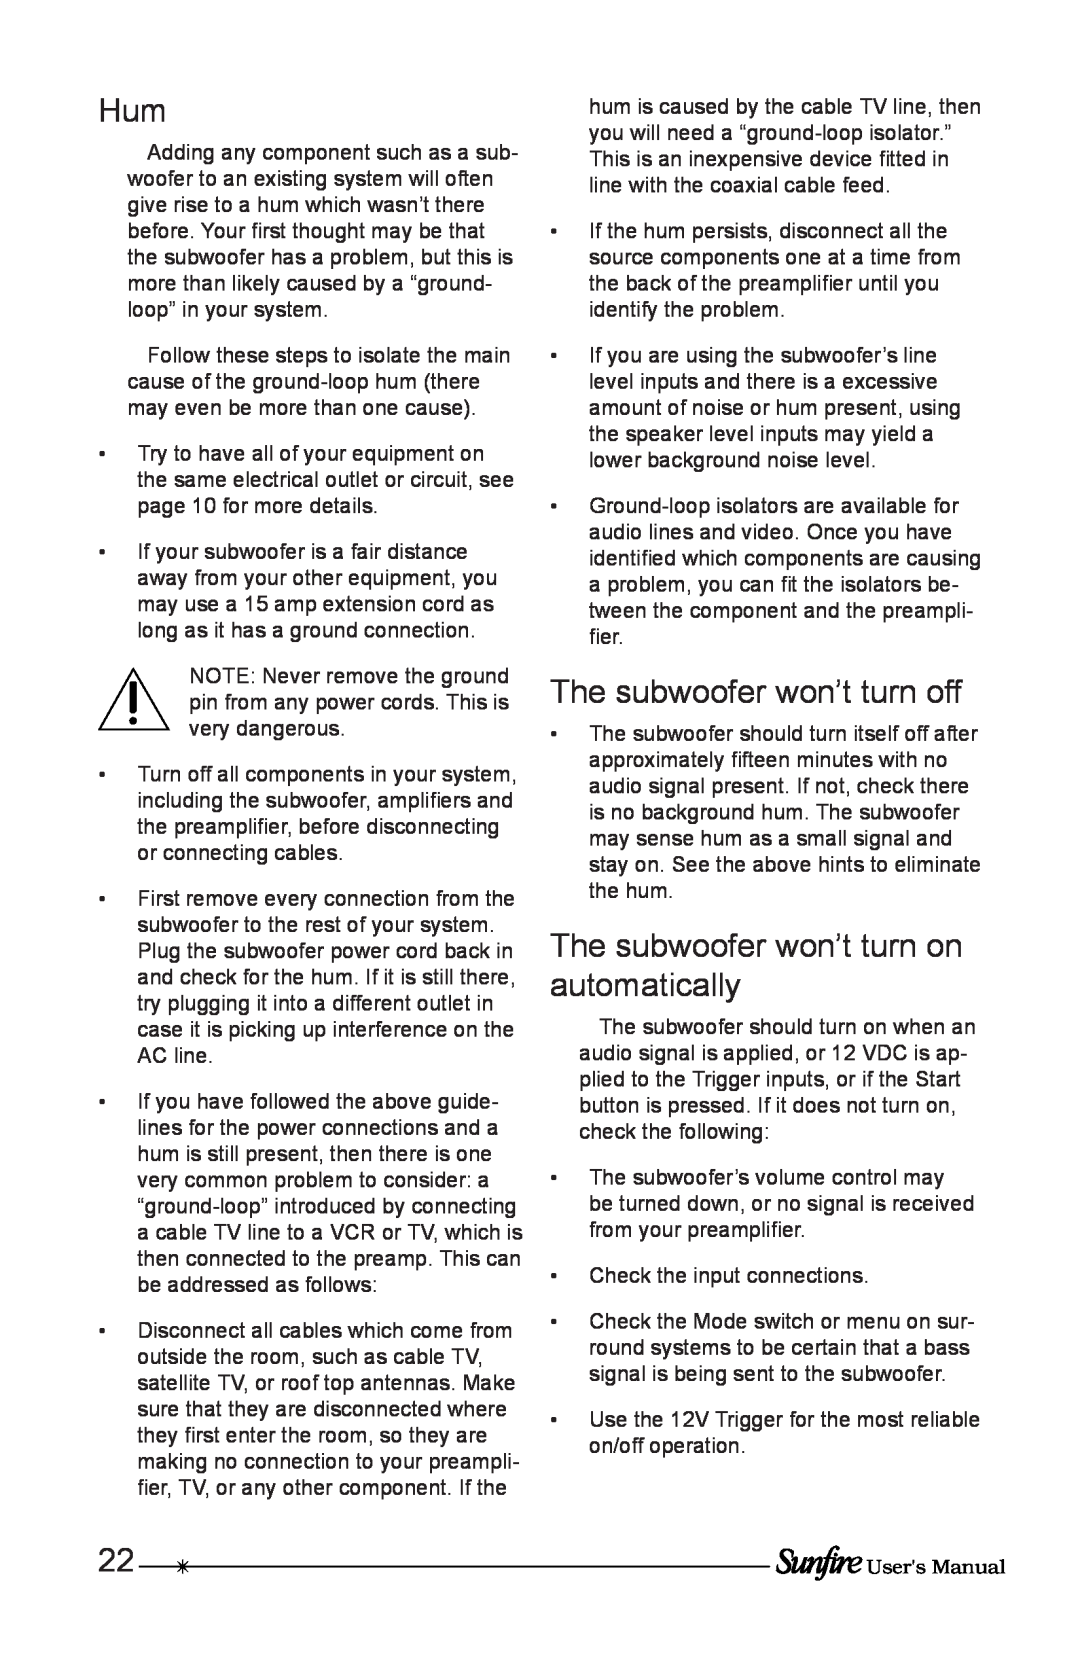 Sunfire Solitaire 10 user manual The subwoofer won’t turn off, The subwoofer won’t turn on automatically 